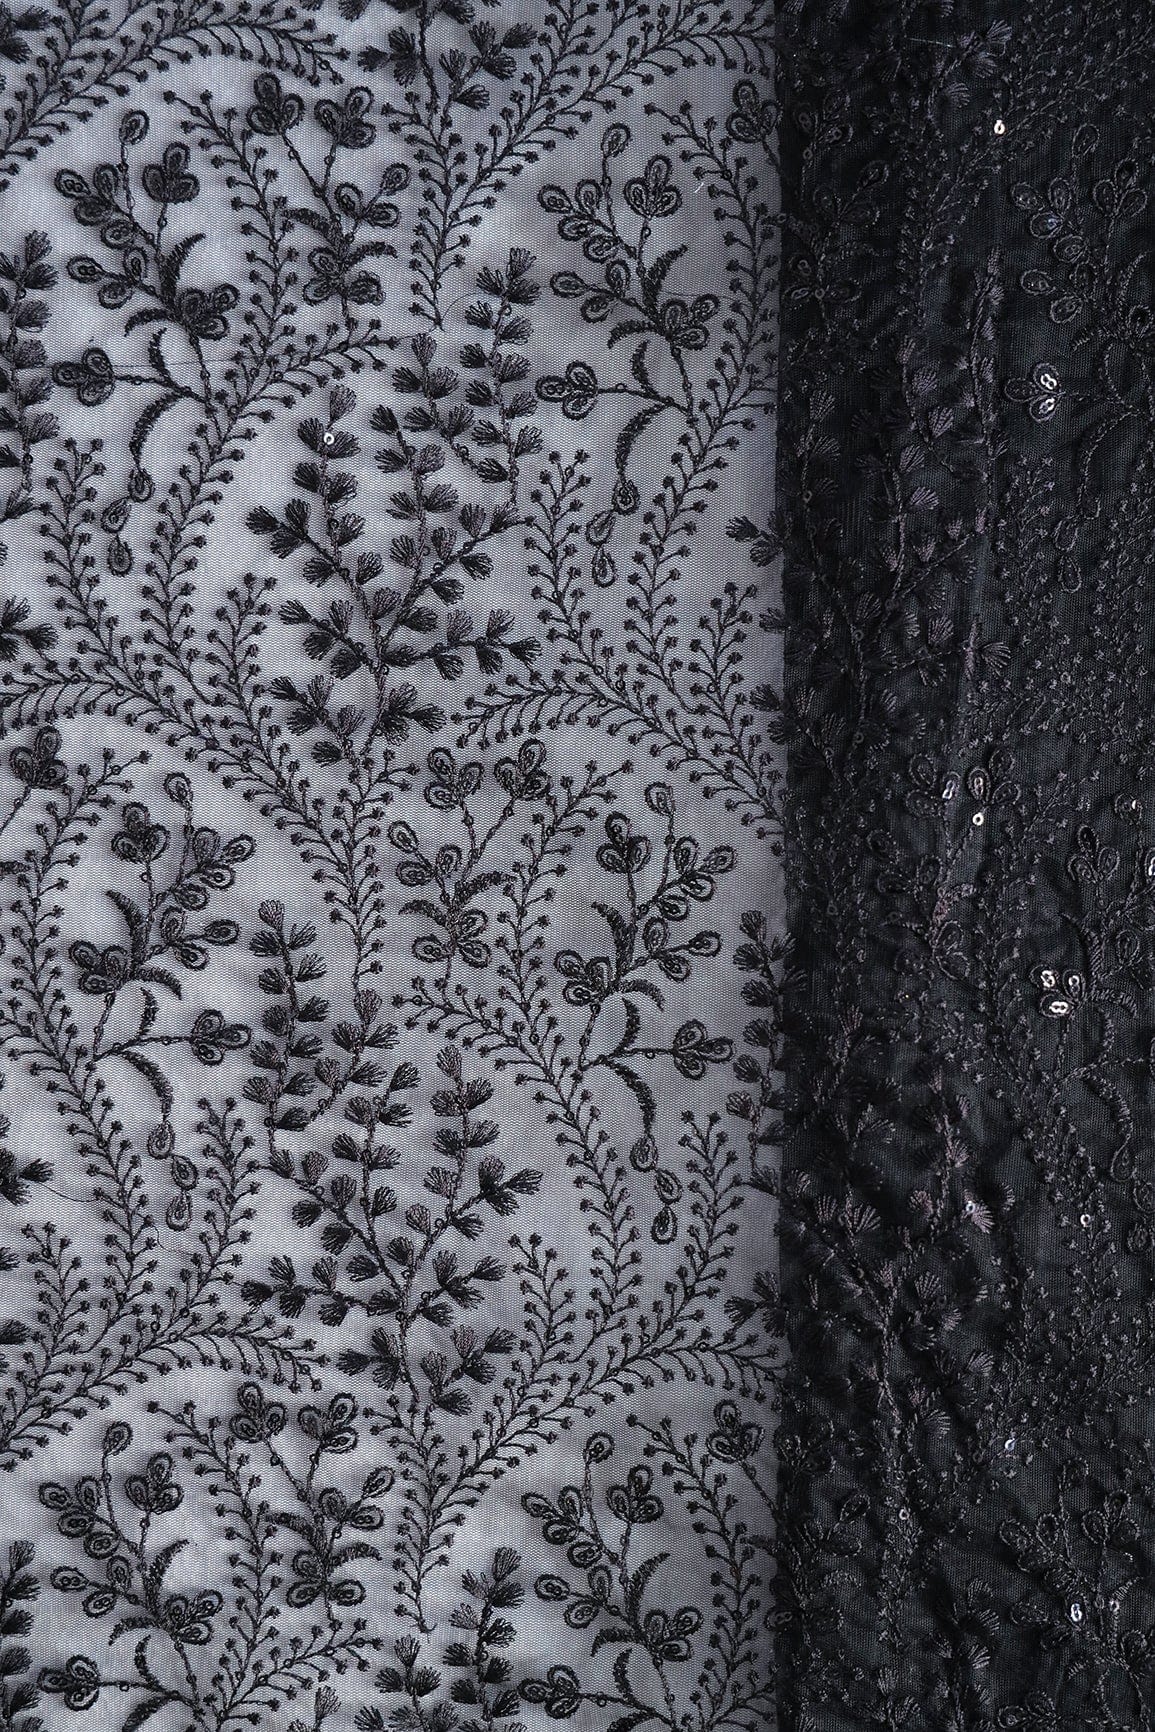 doeraa Embroidery Fabrics Beautiful Black Thread With Sequins Floral Embroidery Work On Black Soft Net Fabric With Border